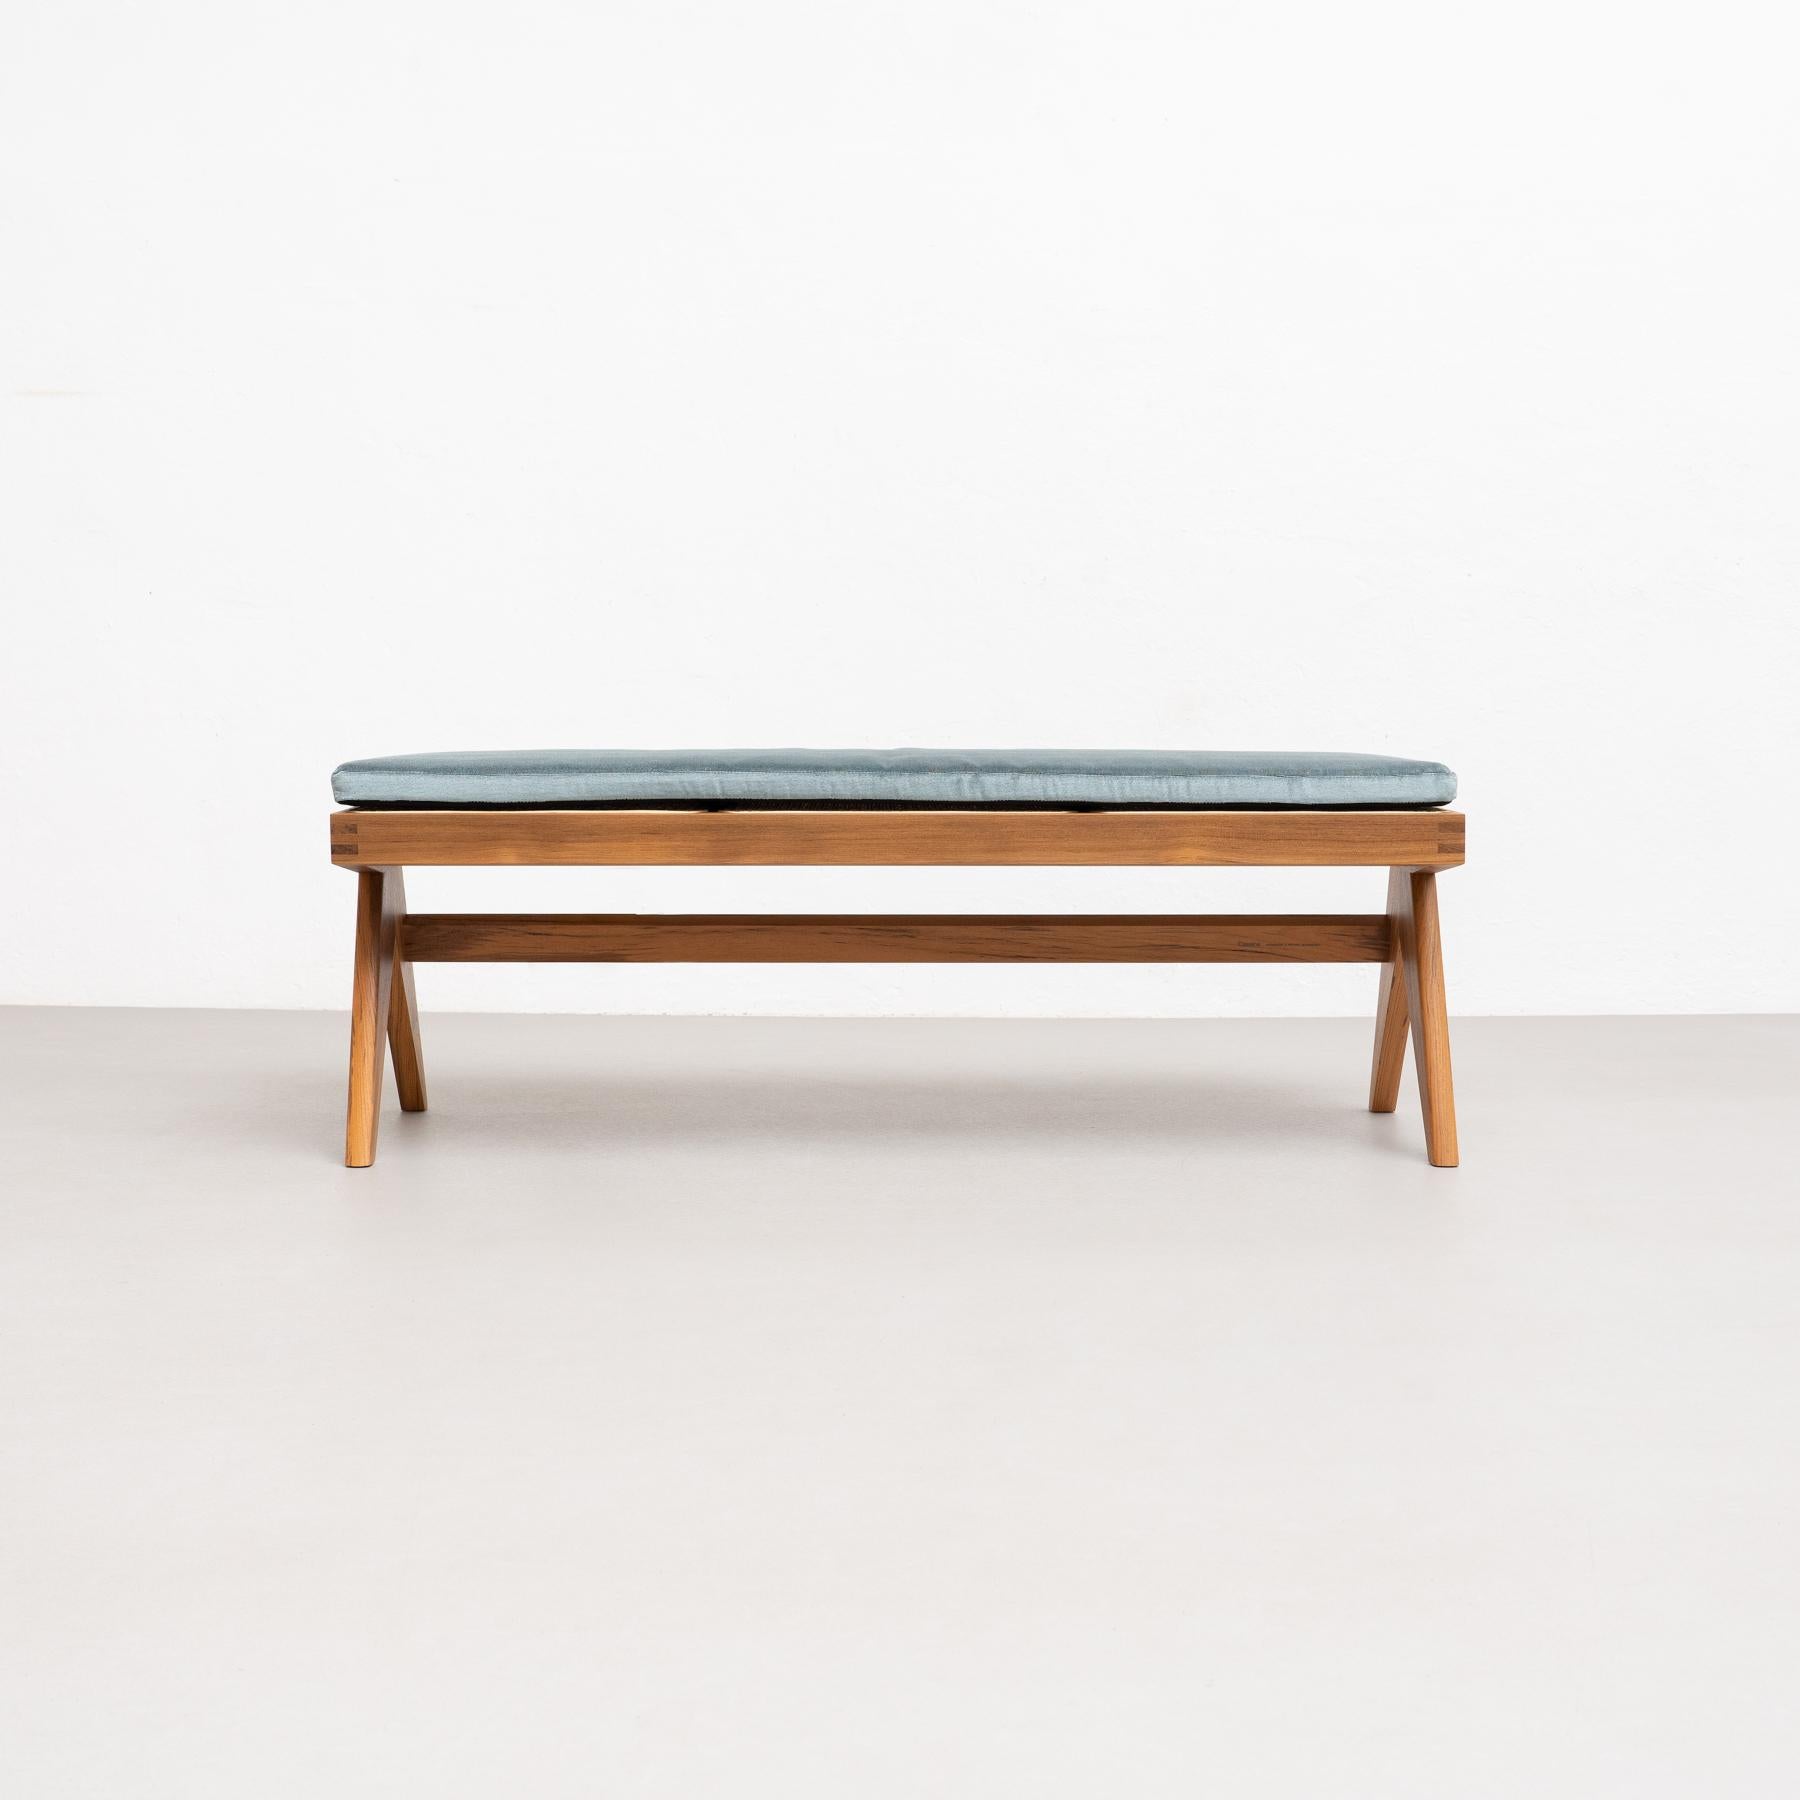 Contemporary Pierre Jeanneret Civil Bench, Wood and Woven Viennese Cane by Cassina